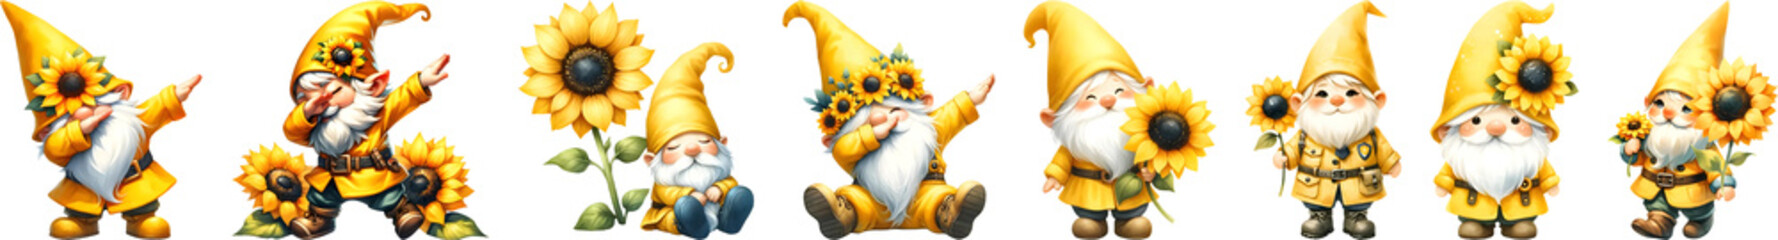 Gnome with sunflower springtime, watercolor illustration.